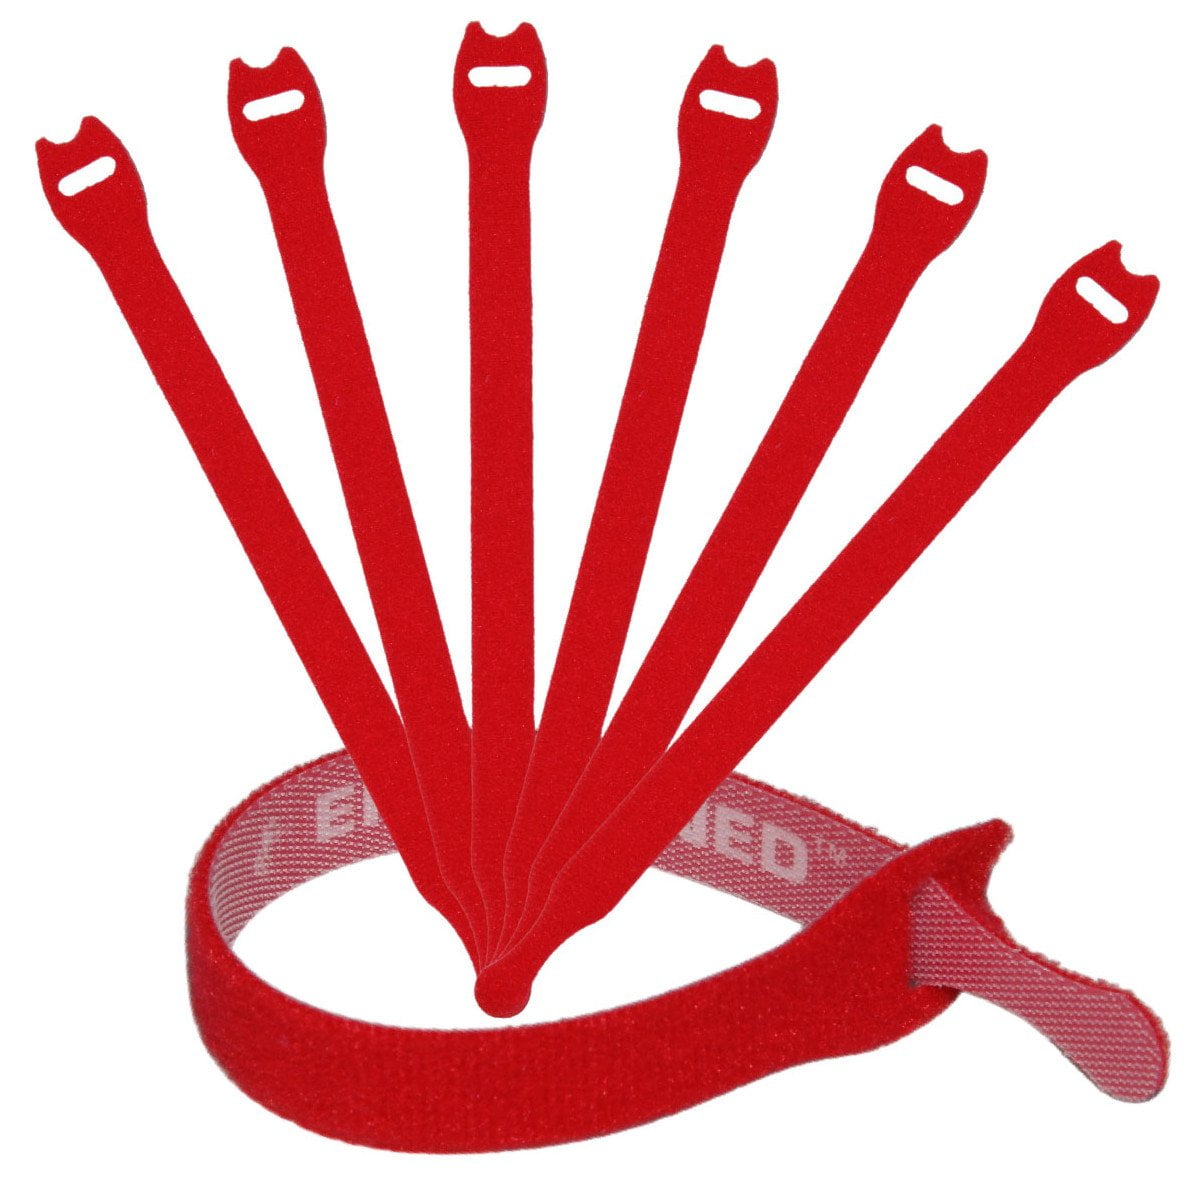 Removable cable ties